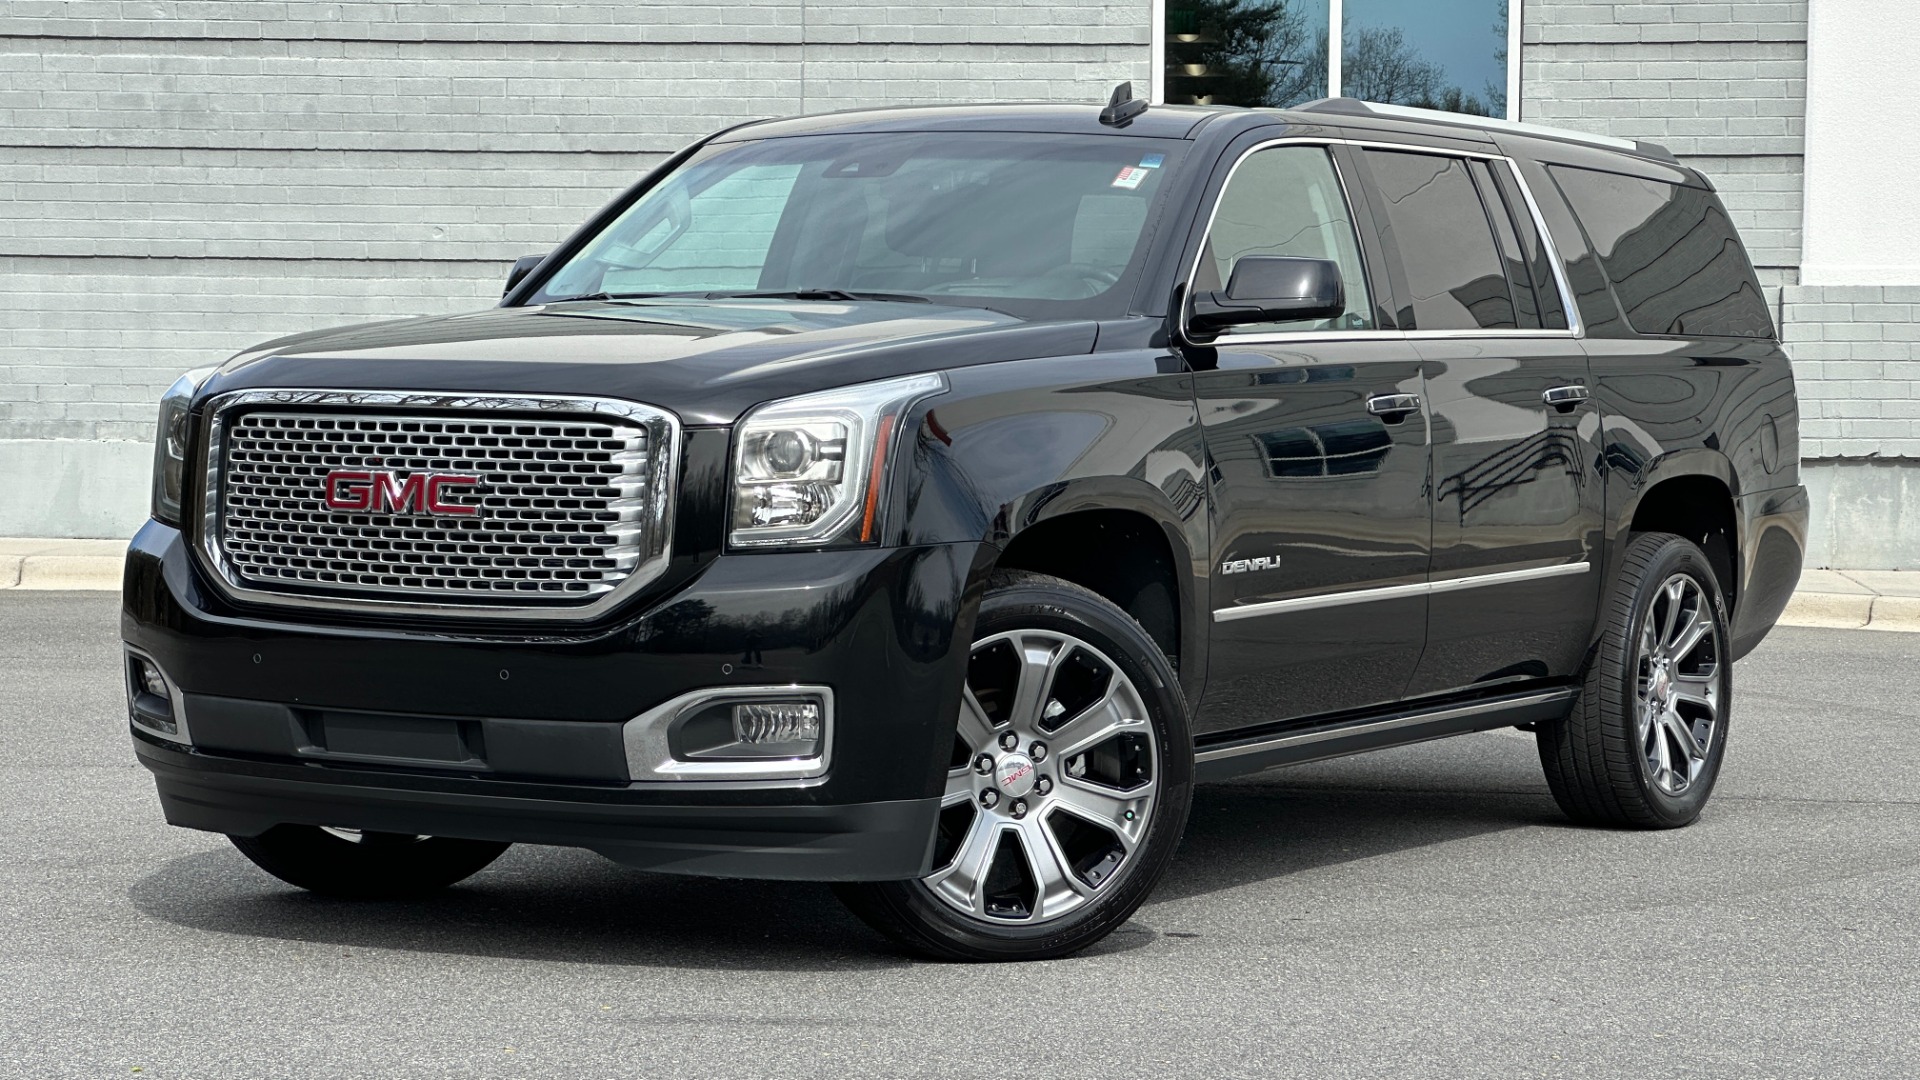 Used 2017 GMC Yukon XL DENALI / OPEN ROAD PACKAGE / 22IN WHEELS / REAR ENTERTAINMENT for sale Sold at Formula Imports in Charlotte NC 28227 1